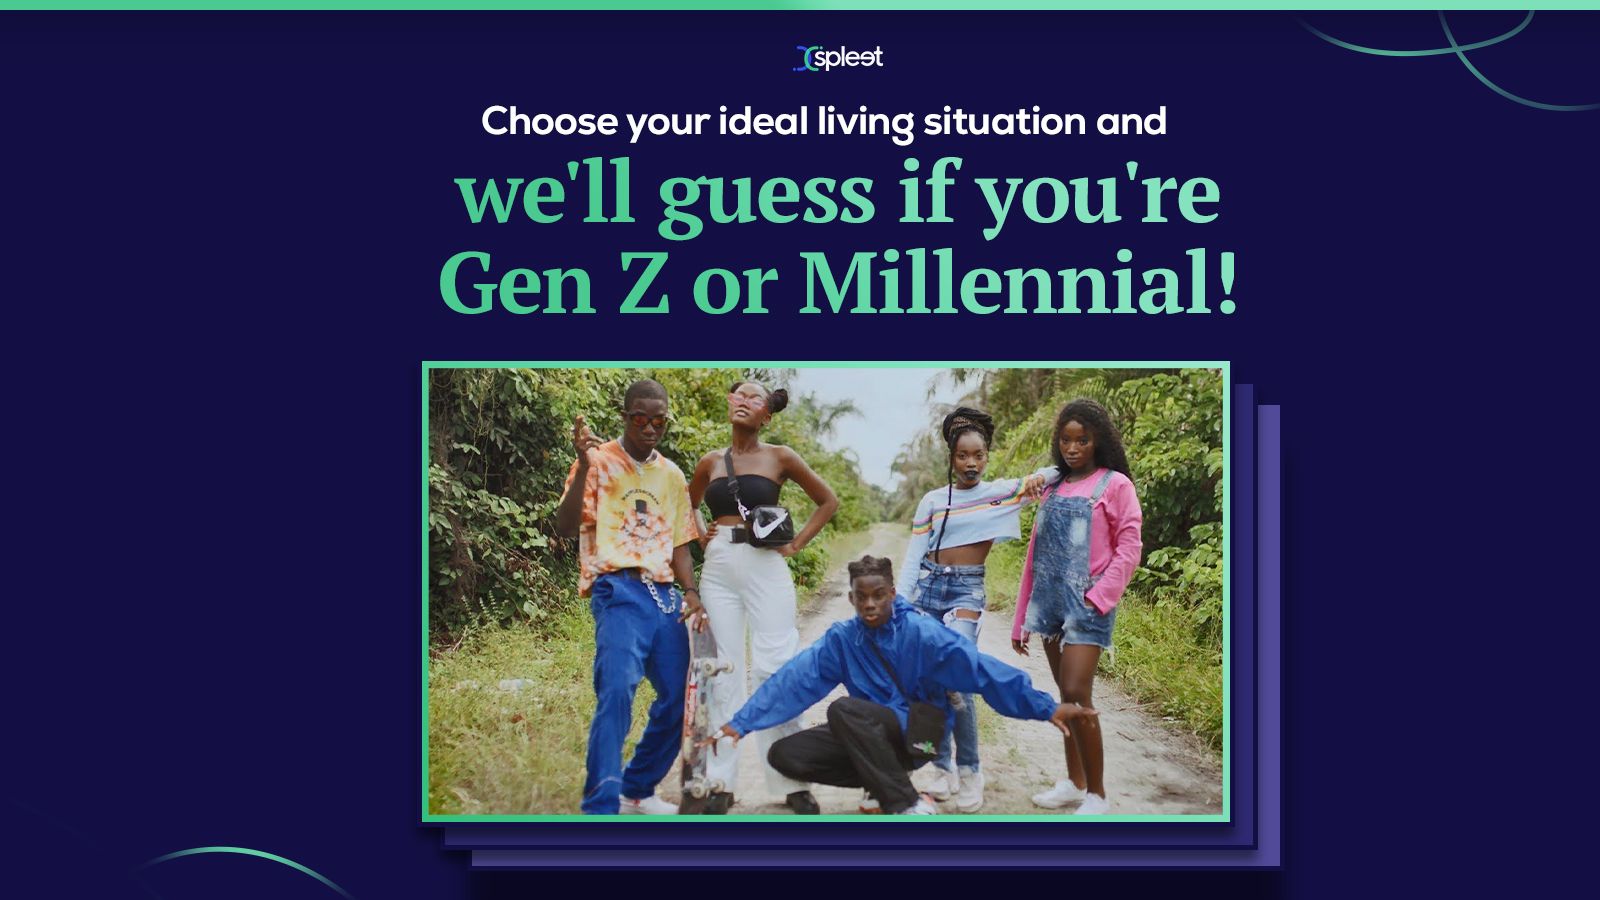 Choose your ideal living situation and we'll guess if you're Gen Z or Millennial!